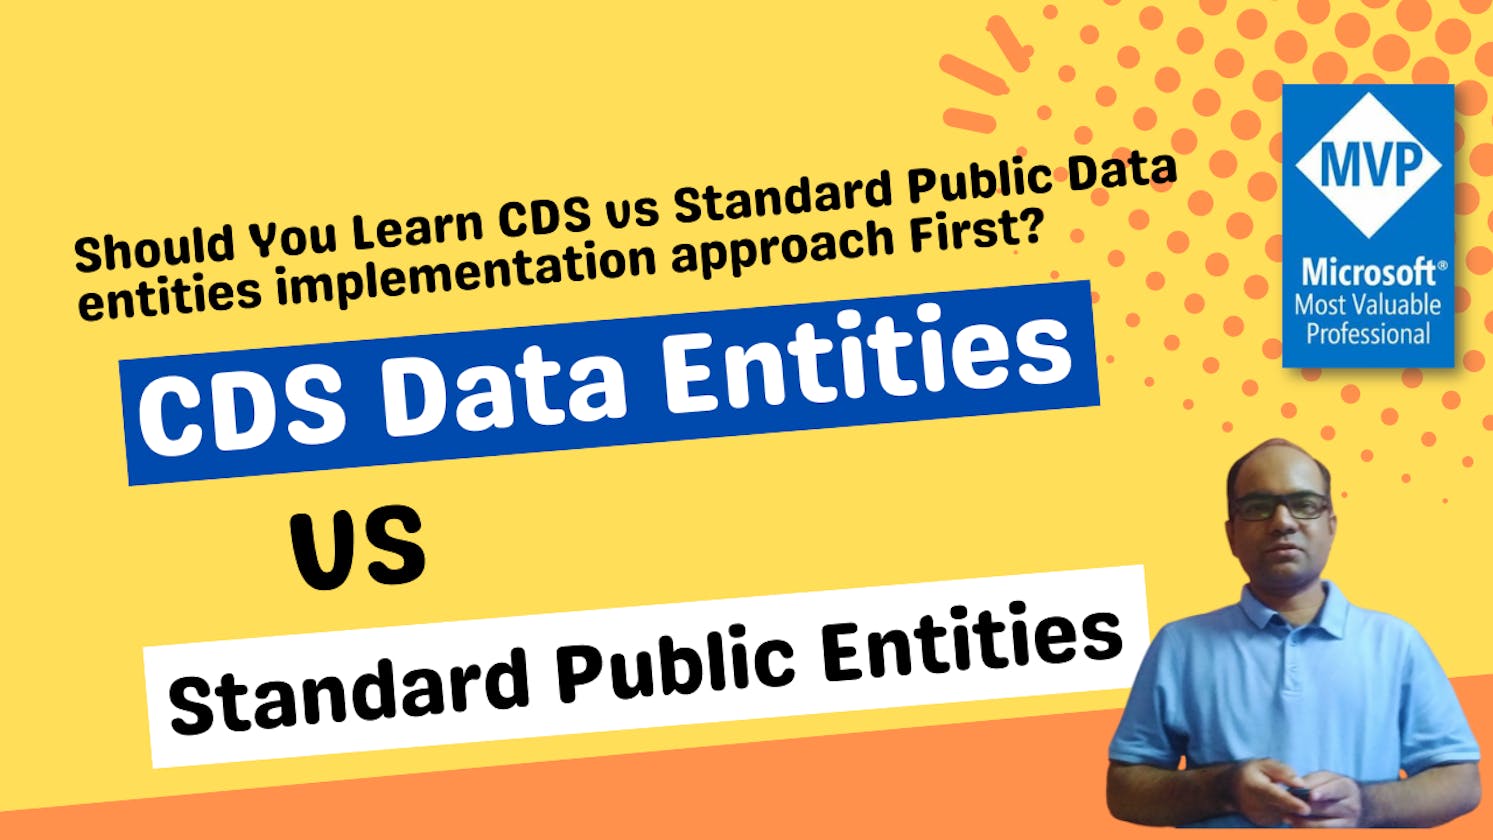 Should You Learn CDS vs. Standard public data entities implementation approach First?